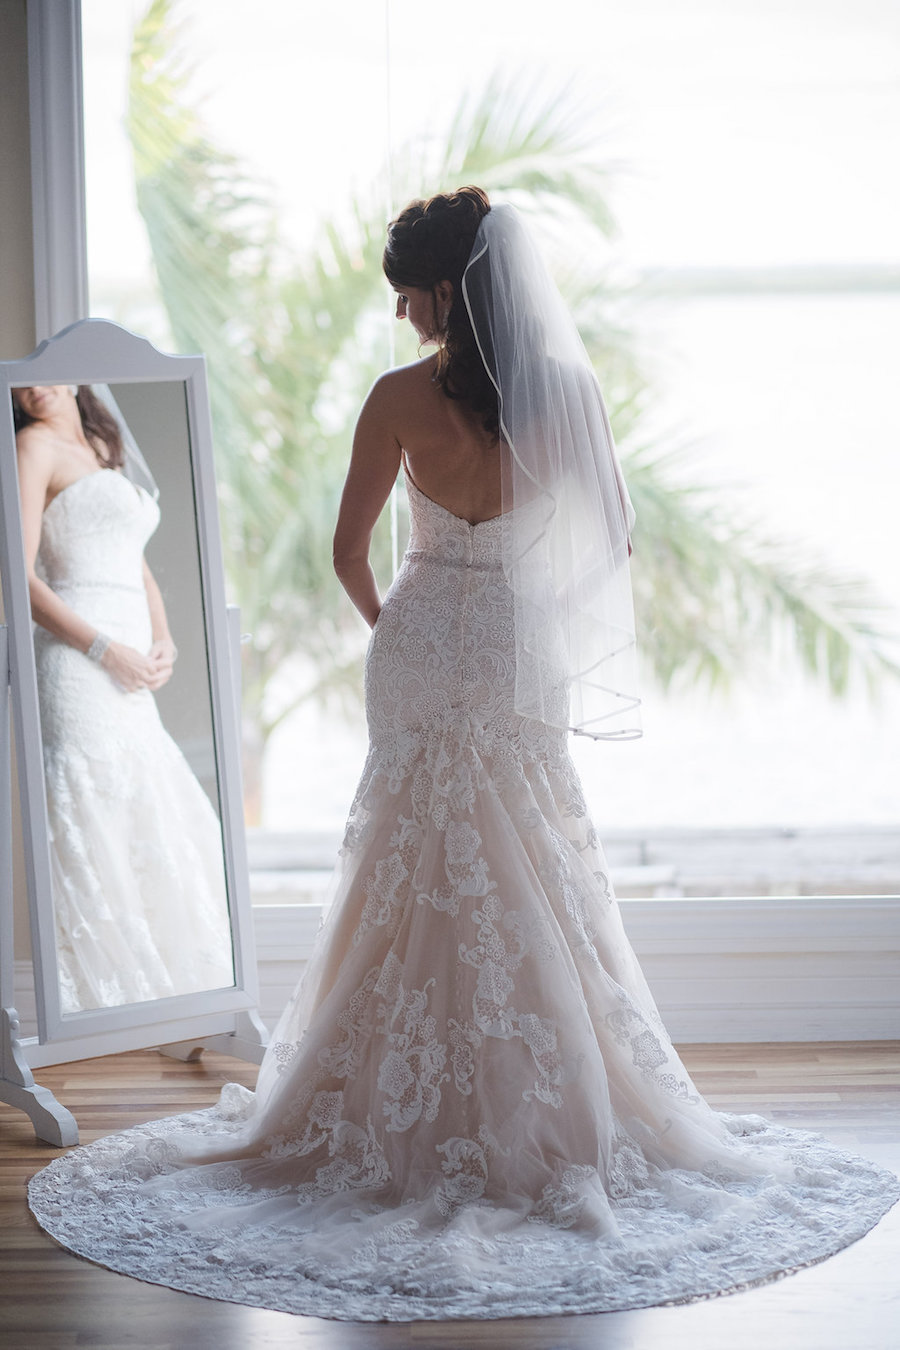 Bridal Wedding Portrait in Lace Allure Bridals Gown | Clearwater Beach Wedding Photographer Marc Edwards Photographs